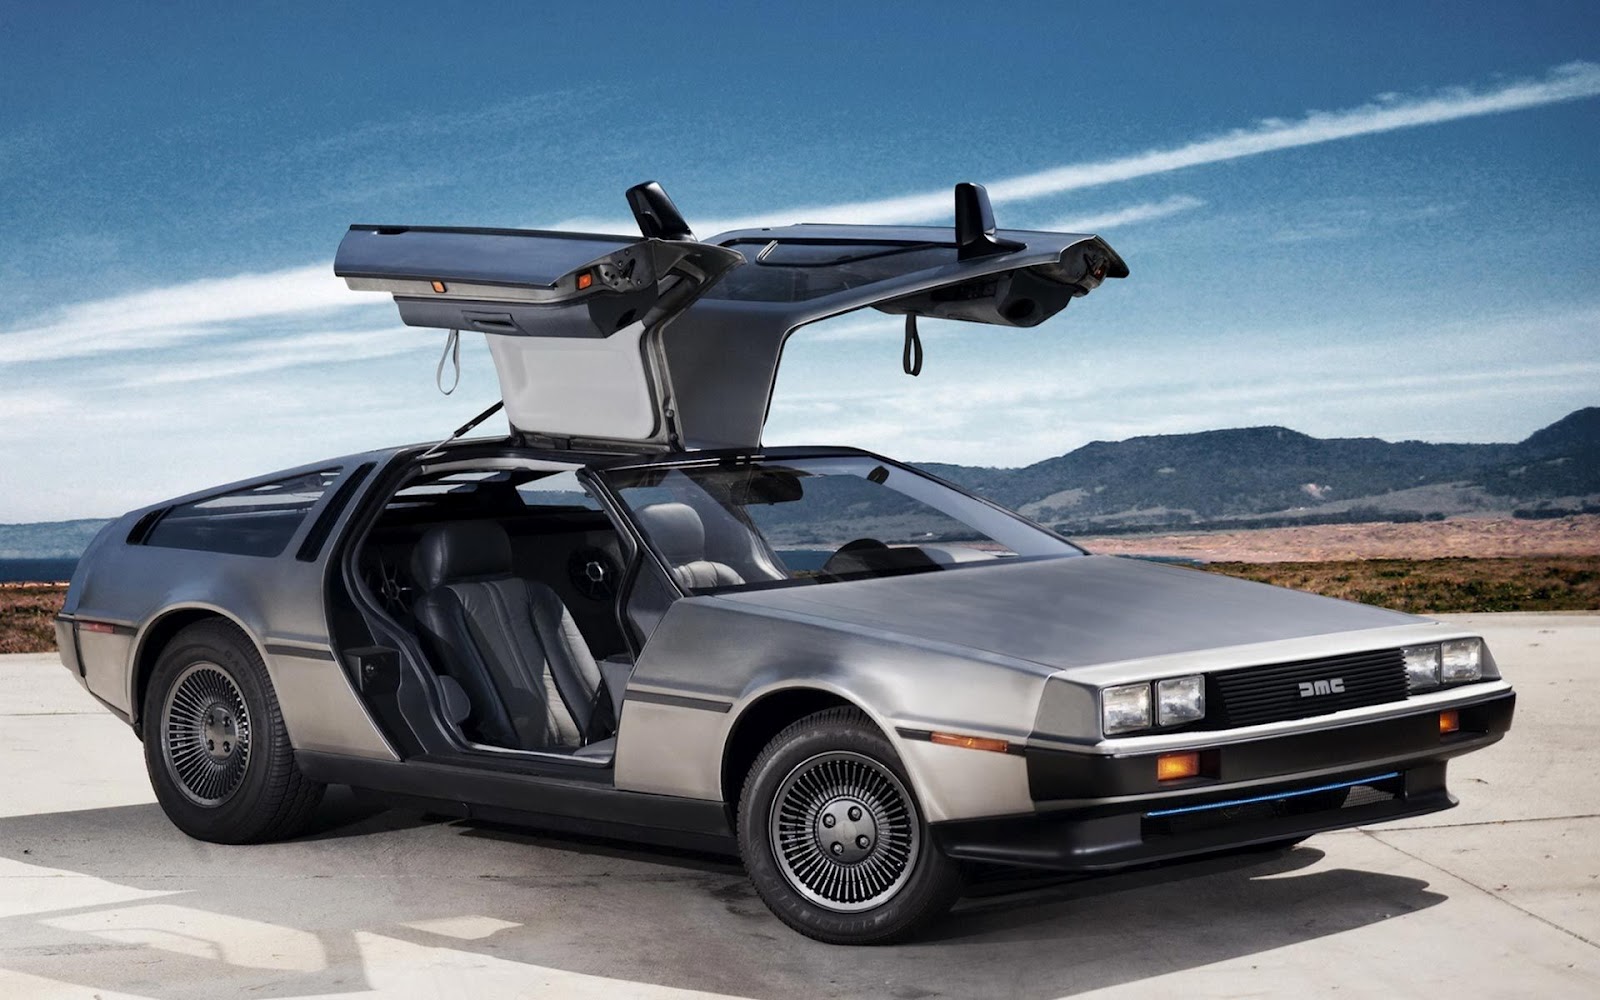 Few Shots Of How Most People Know The Delorean